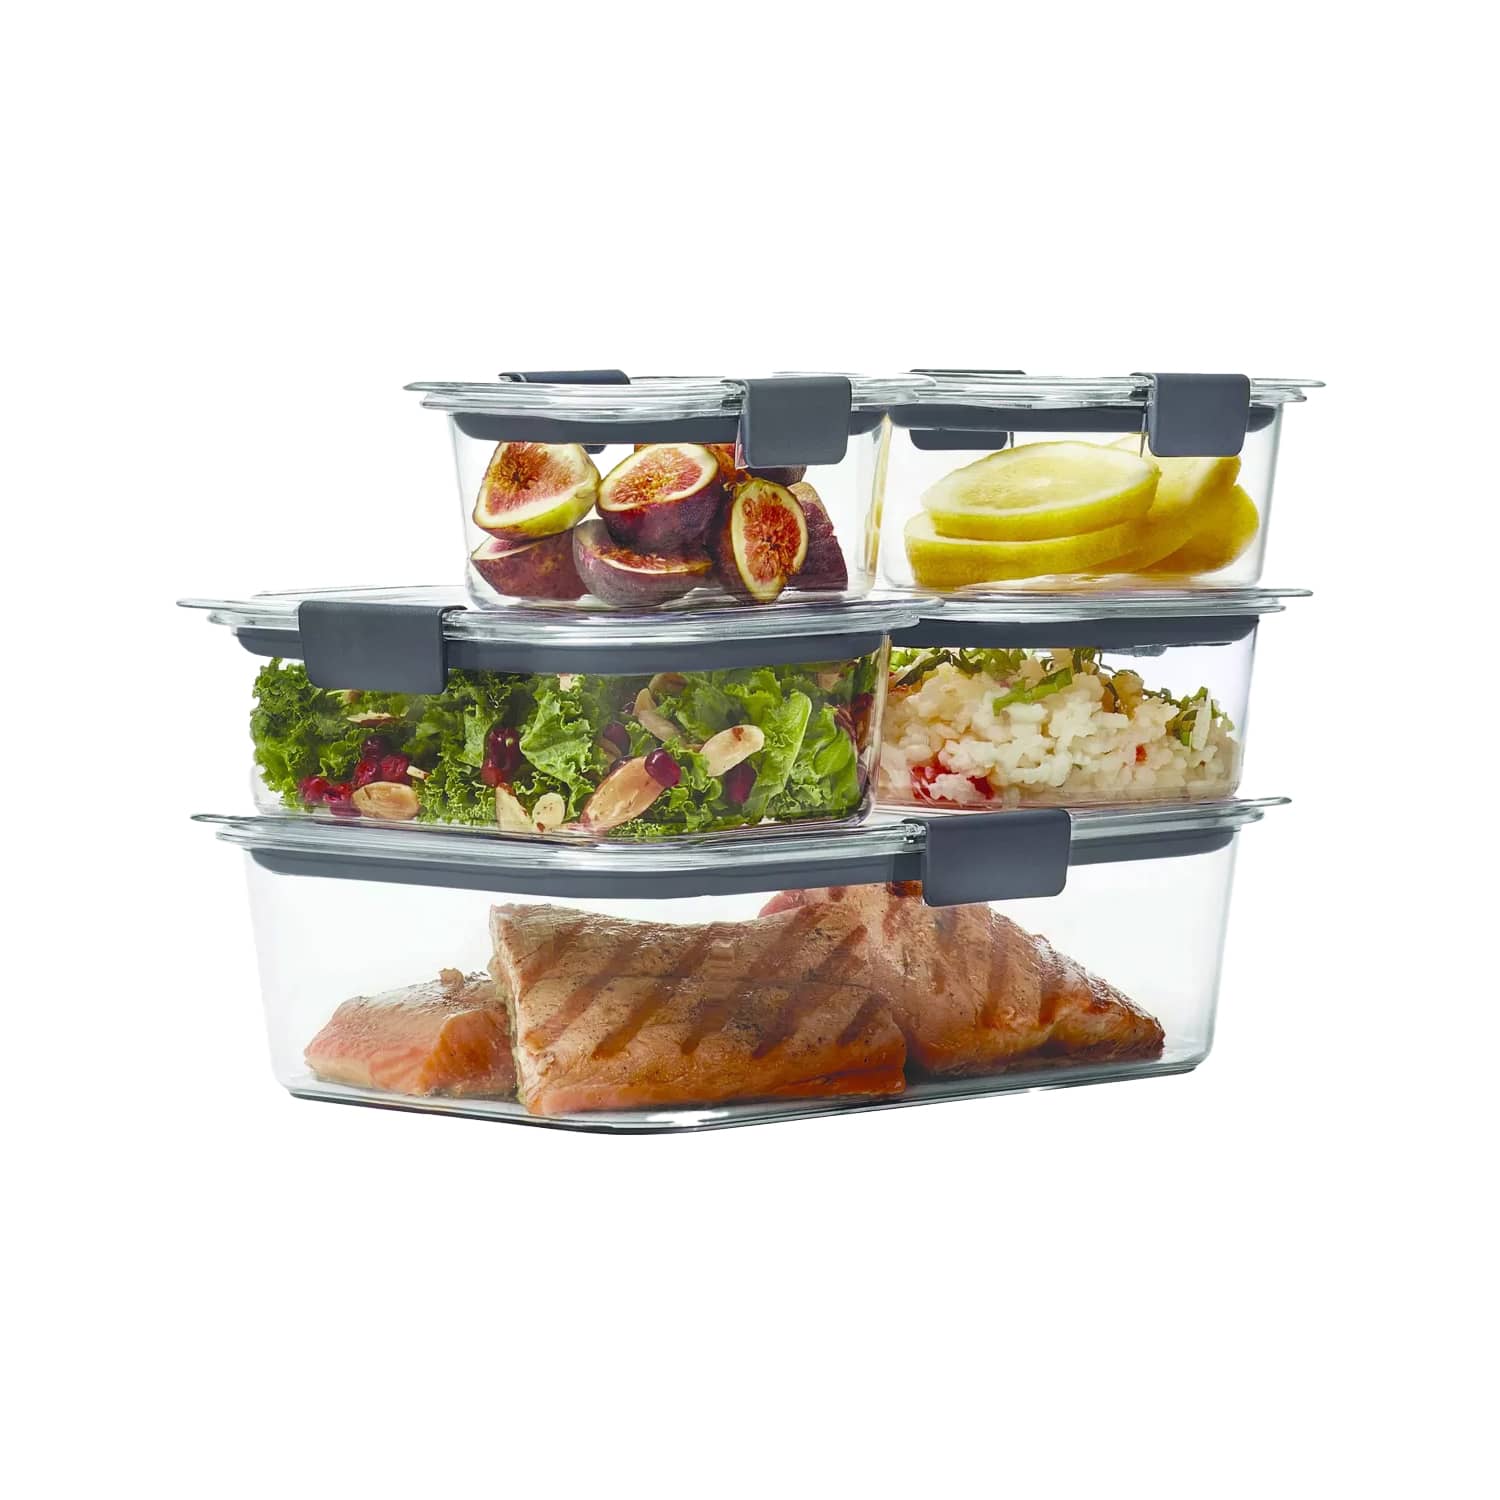 Rubbermaid Commercial and Home Food Storage - Get Decluttered Now!